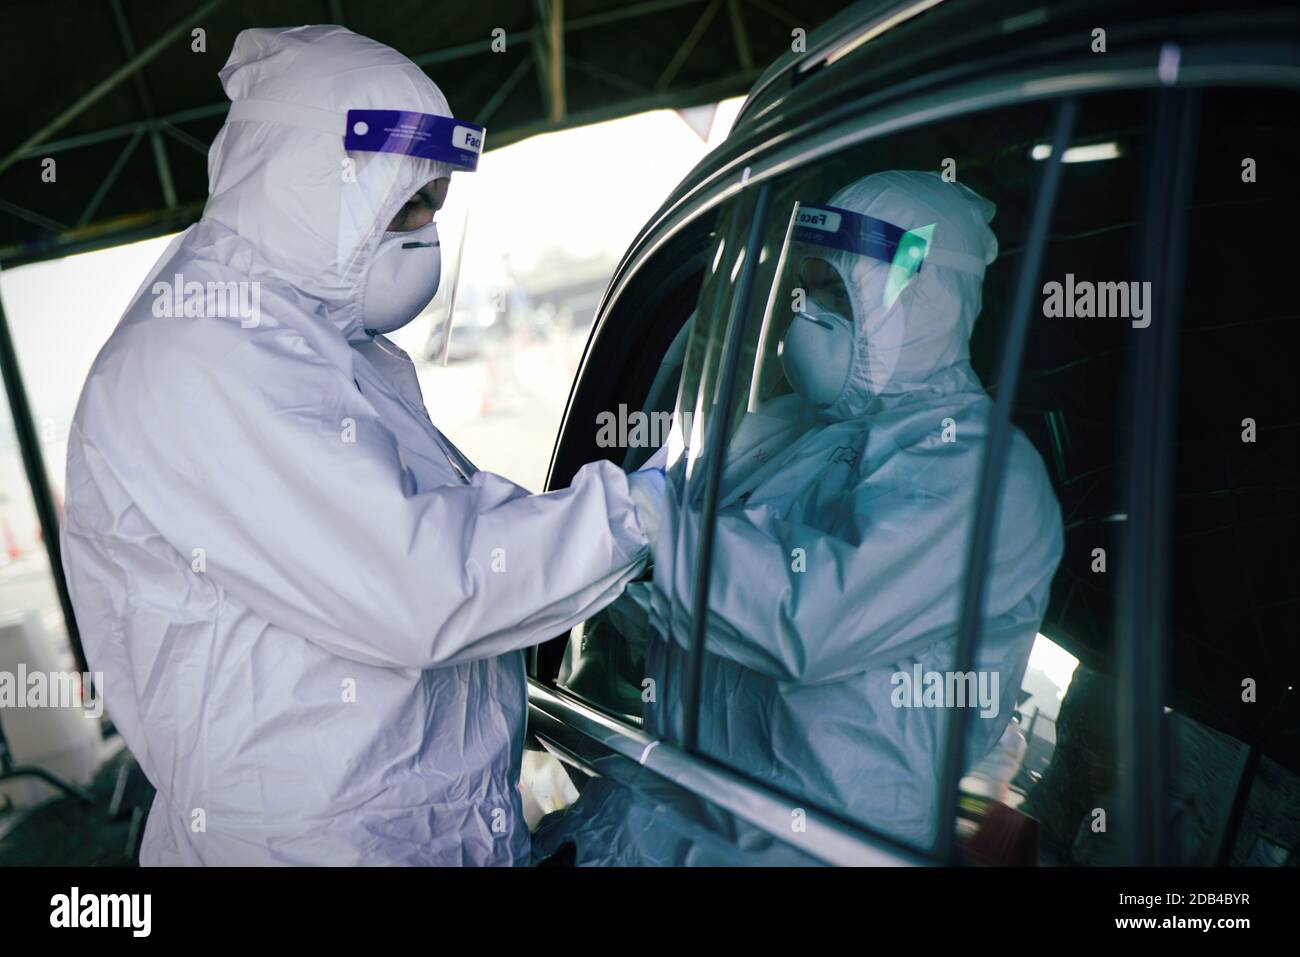 Medical worker in PPE performing nasal & throat swab on person in vehicle through car window,COVID-19 mobile testing centre. Turin, Italy - November 2 Stock Photo